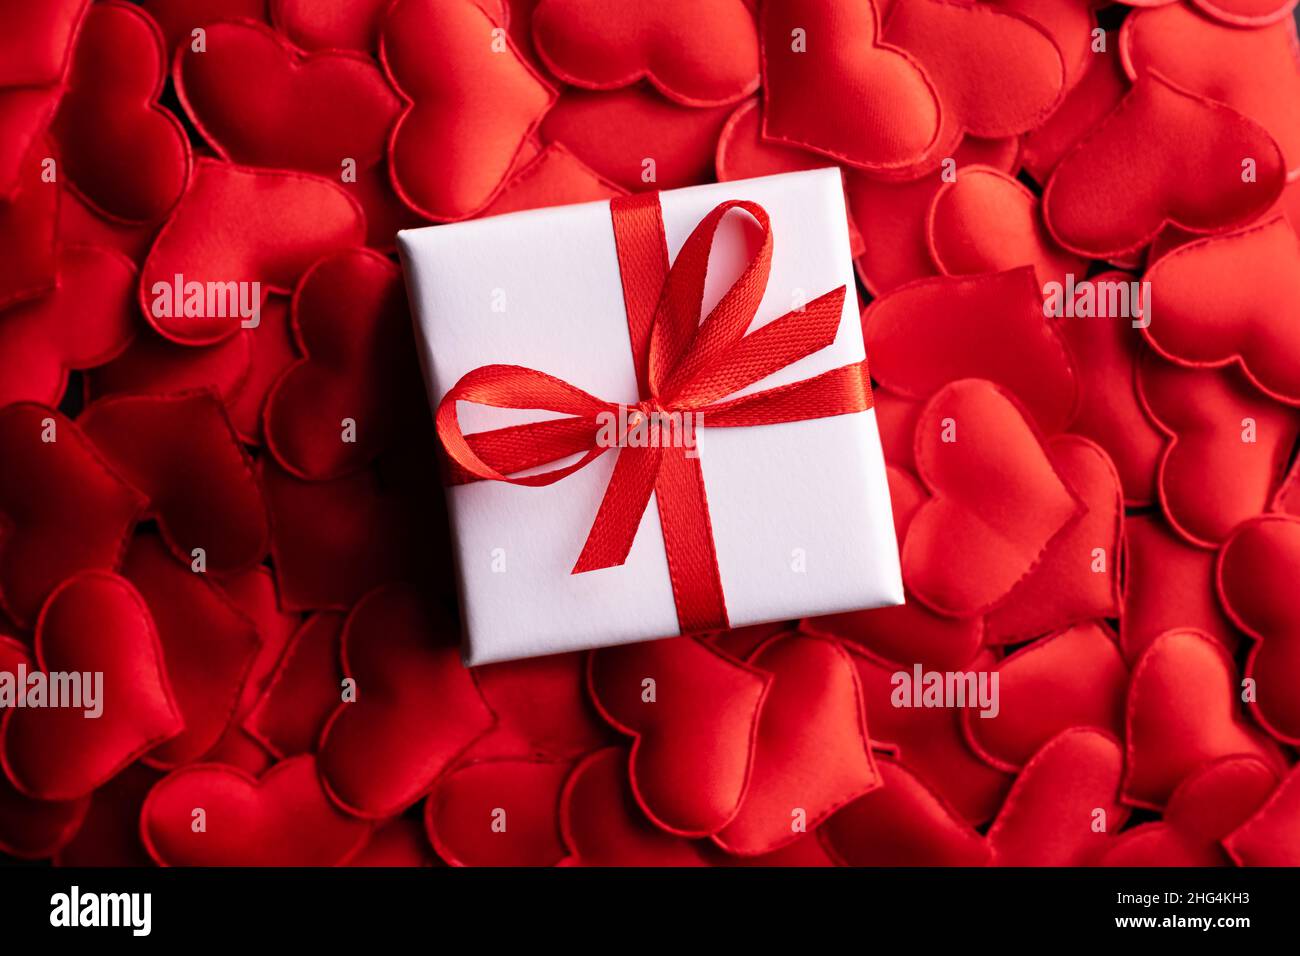 Creative Valentines Day postcard design with white gift box with ribbon bow on red textile hearts background. Valentine day and love concept Stock Photo